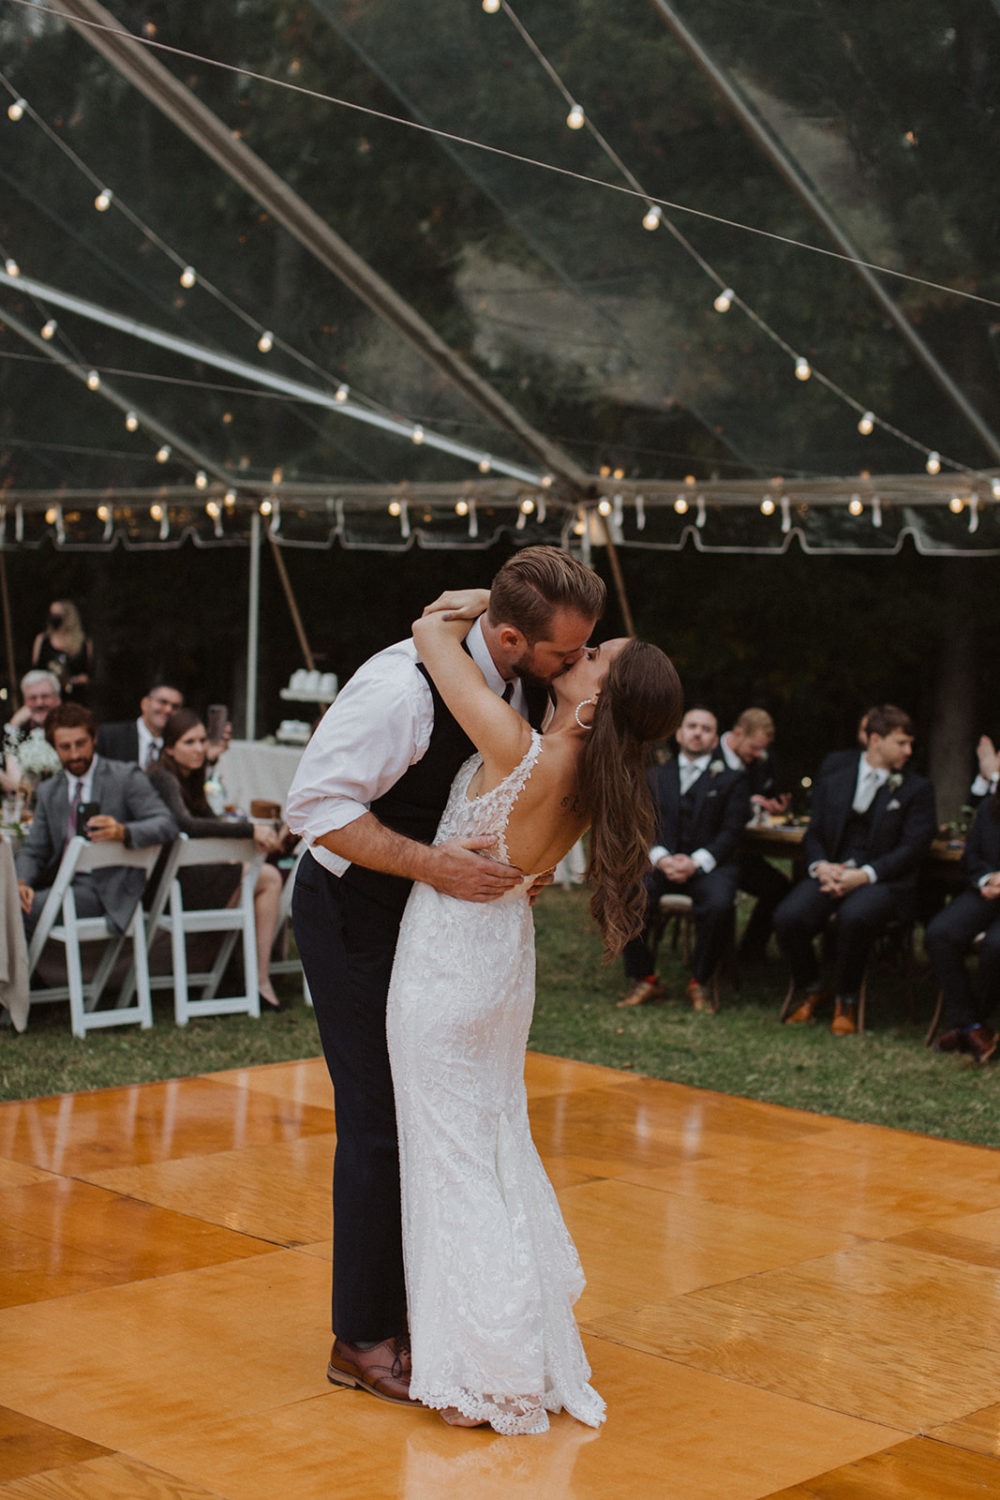 Couple kisses on dance floor at tented wedding